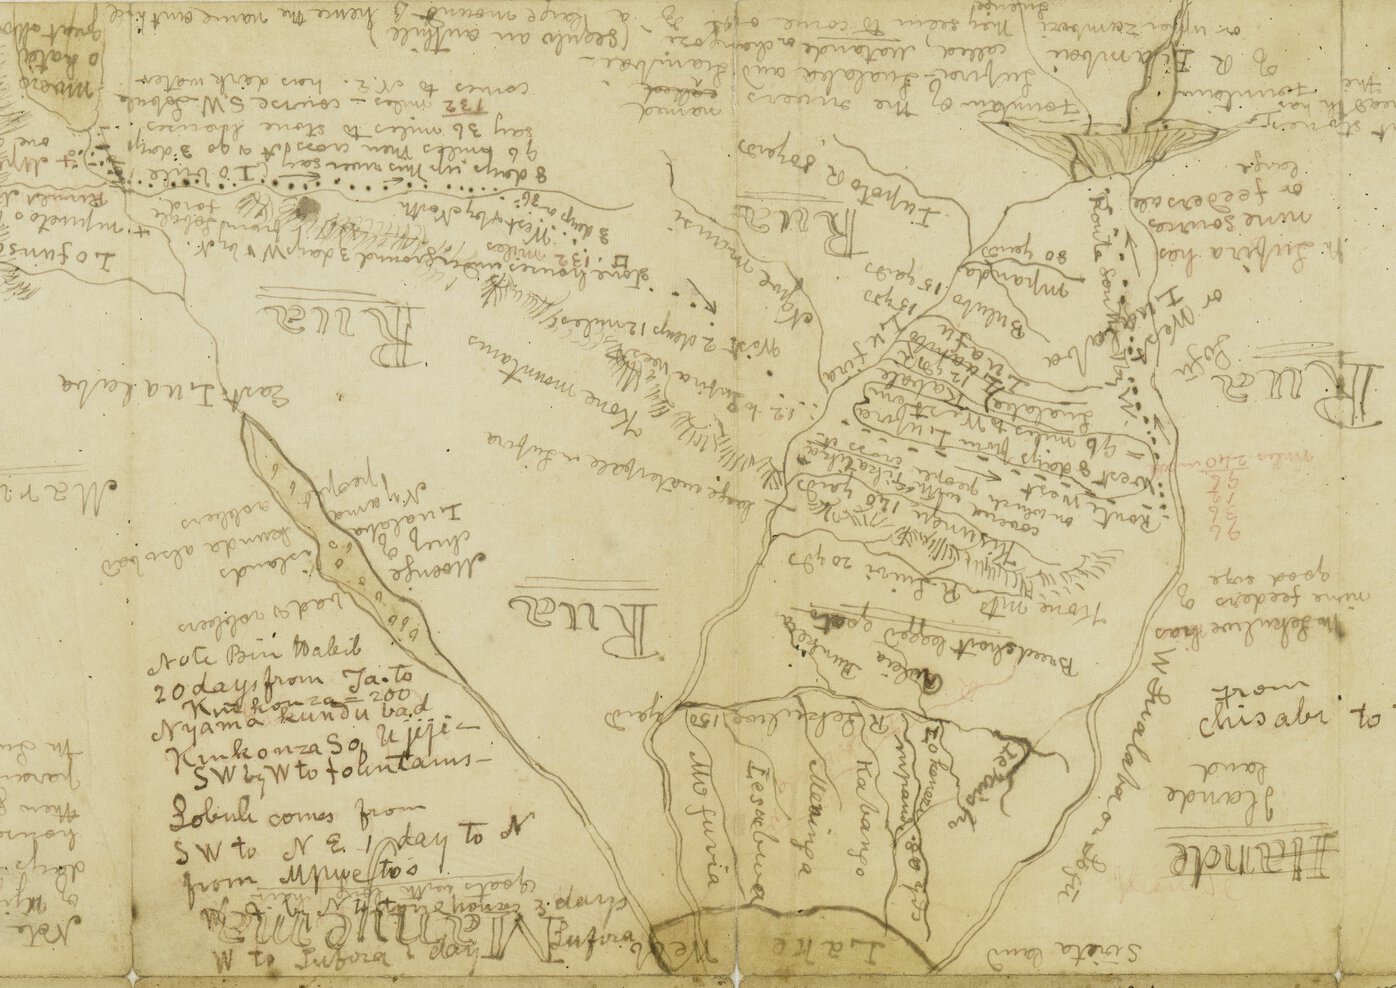 Hand-drawn annotated map of Central Africa showing lakes and rivers; includes text “Note Bin Habib.”